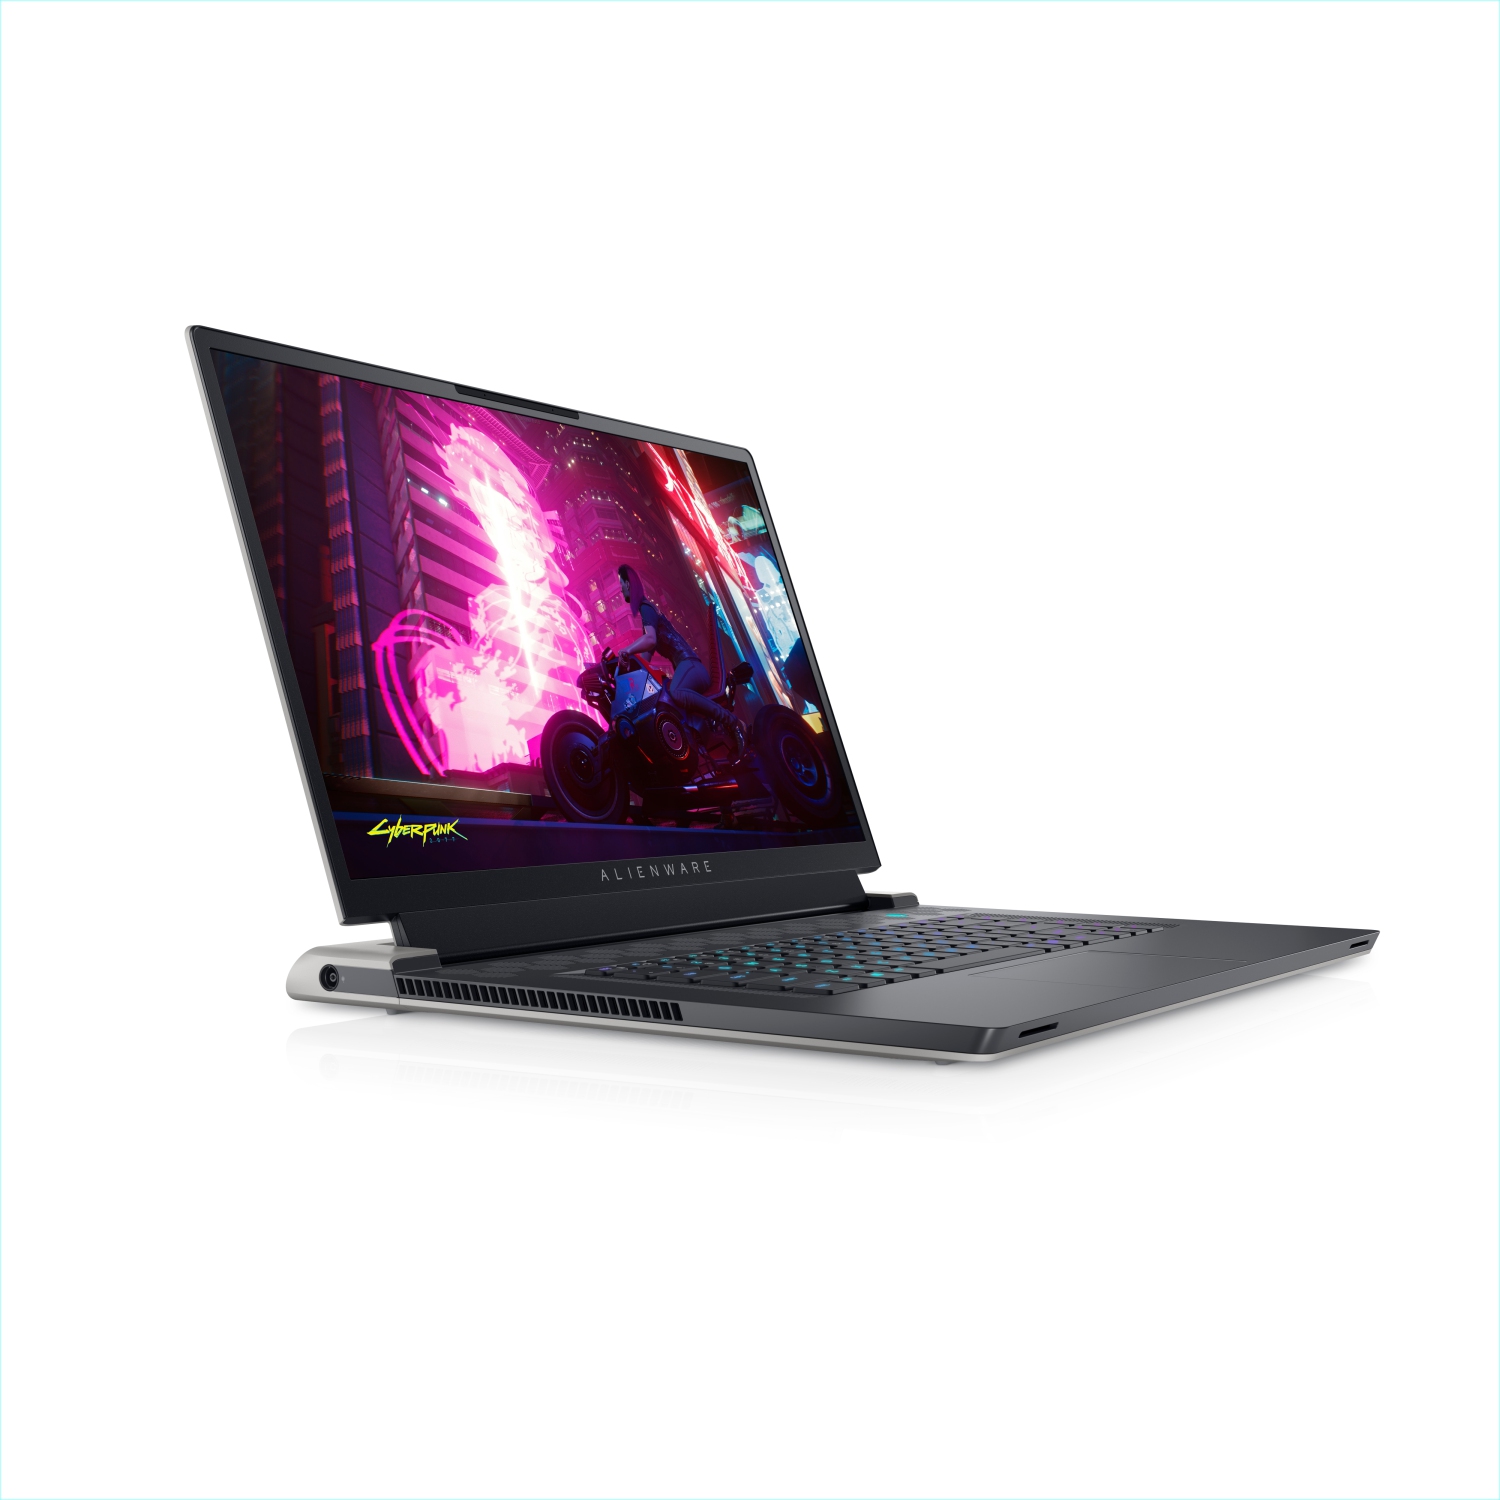 Refurbished (Excellent) - Dell Alienware X17 R1 Gaming Laptop (2021), 17.3" 4K, Core i9, 2TB SSD, 32GB RAM, RTX 3080, 8 Cores @ 5 GHz, 11th Gen CPU Certified Refurbished